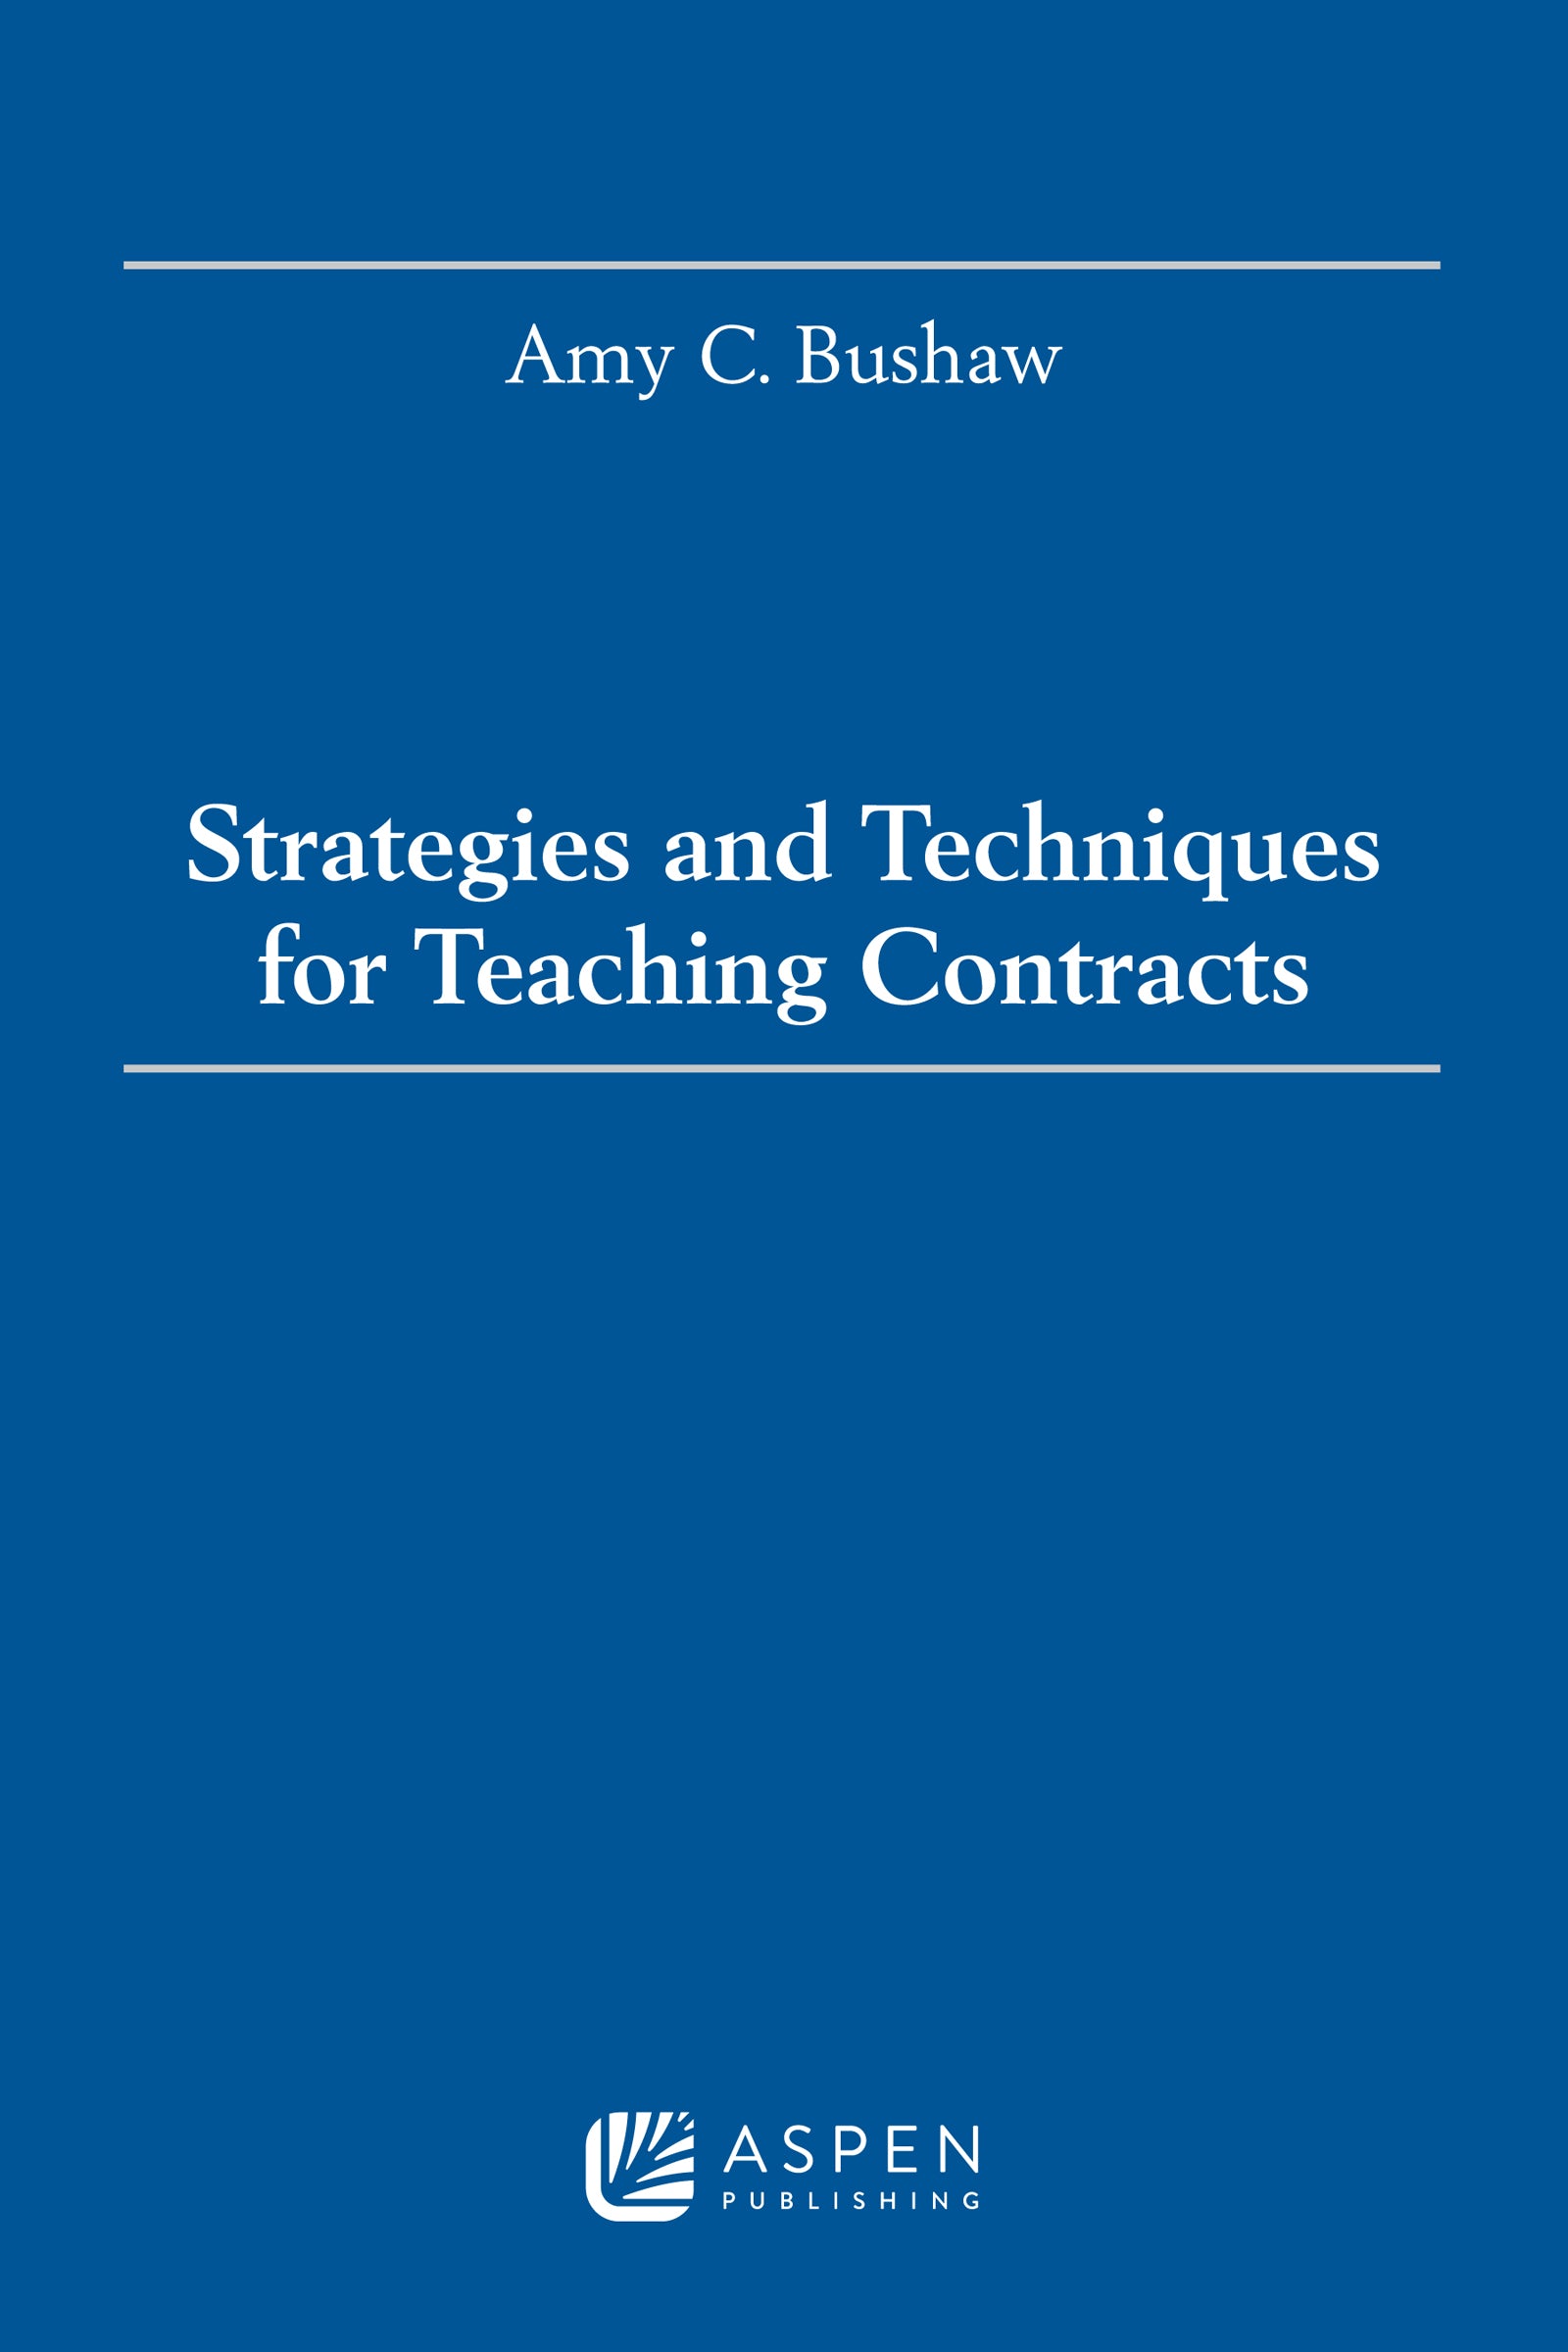 Strategies and Techniques for Teaching Contracts